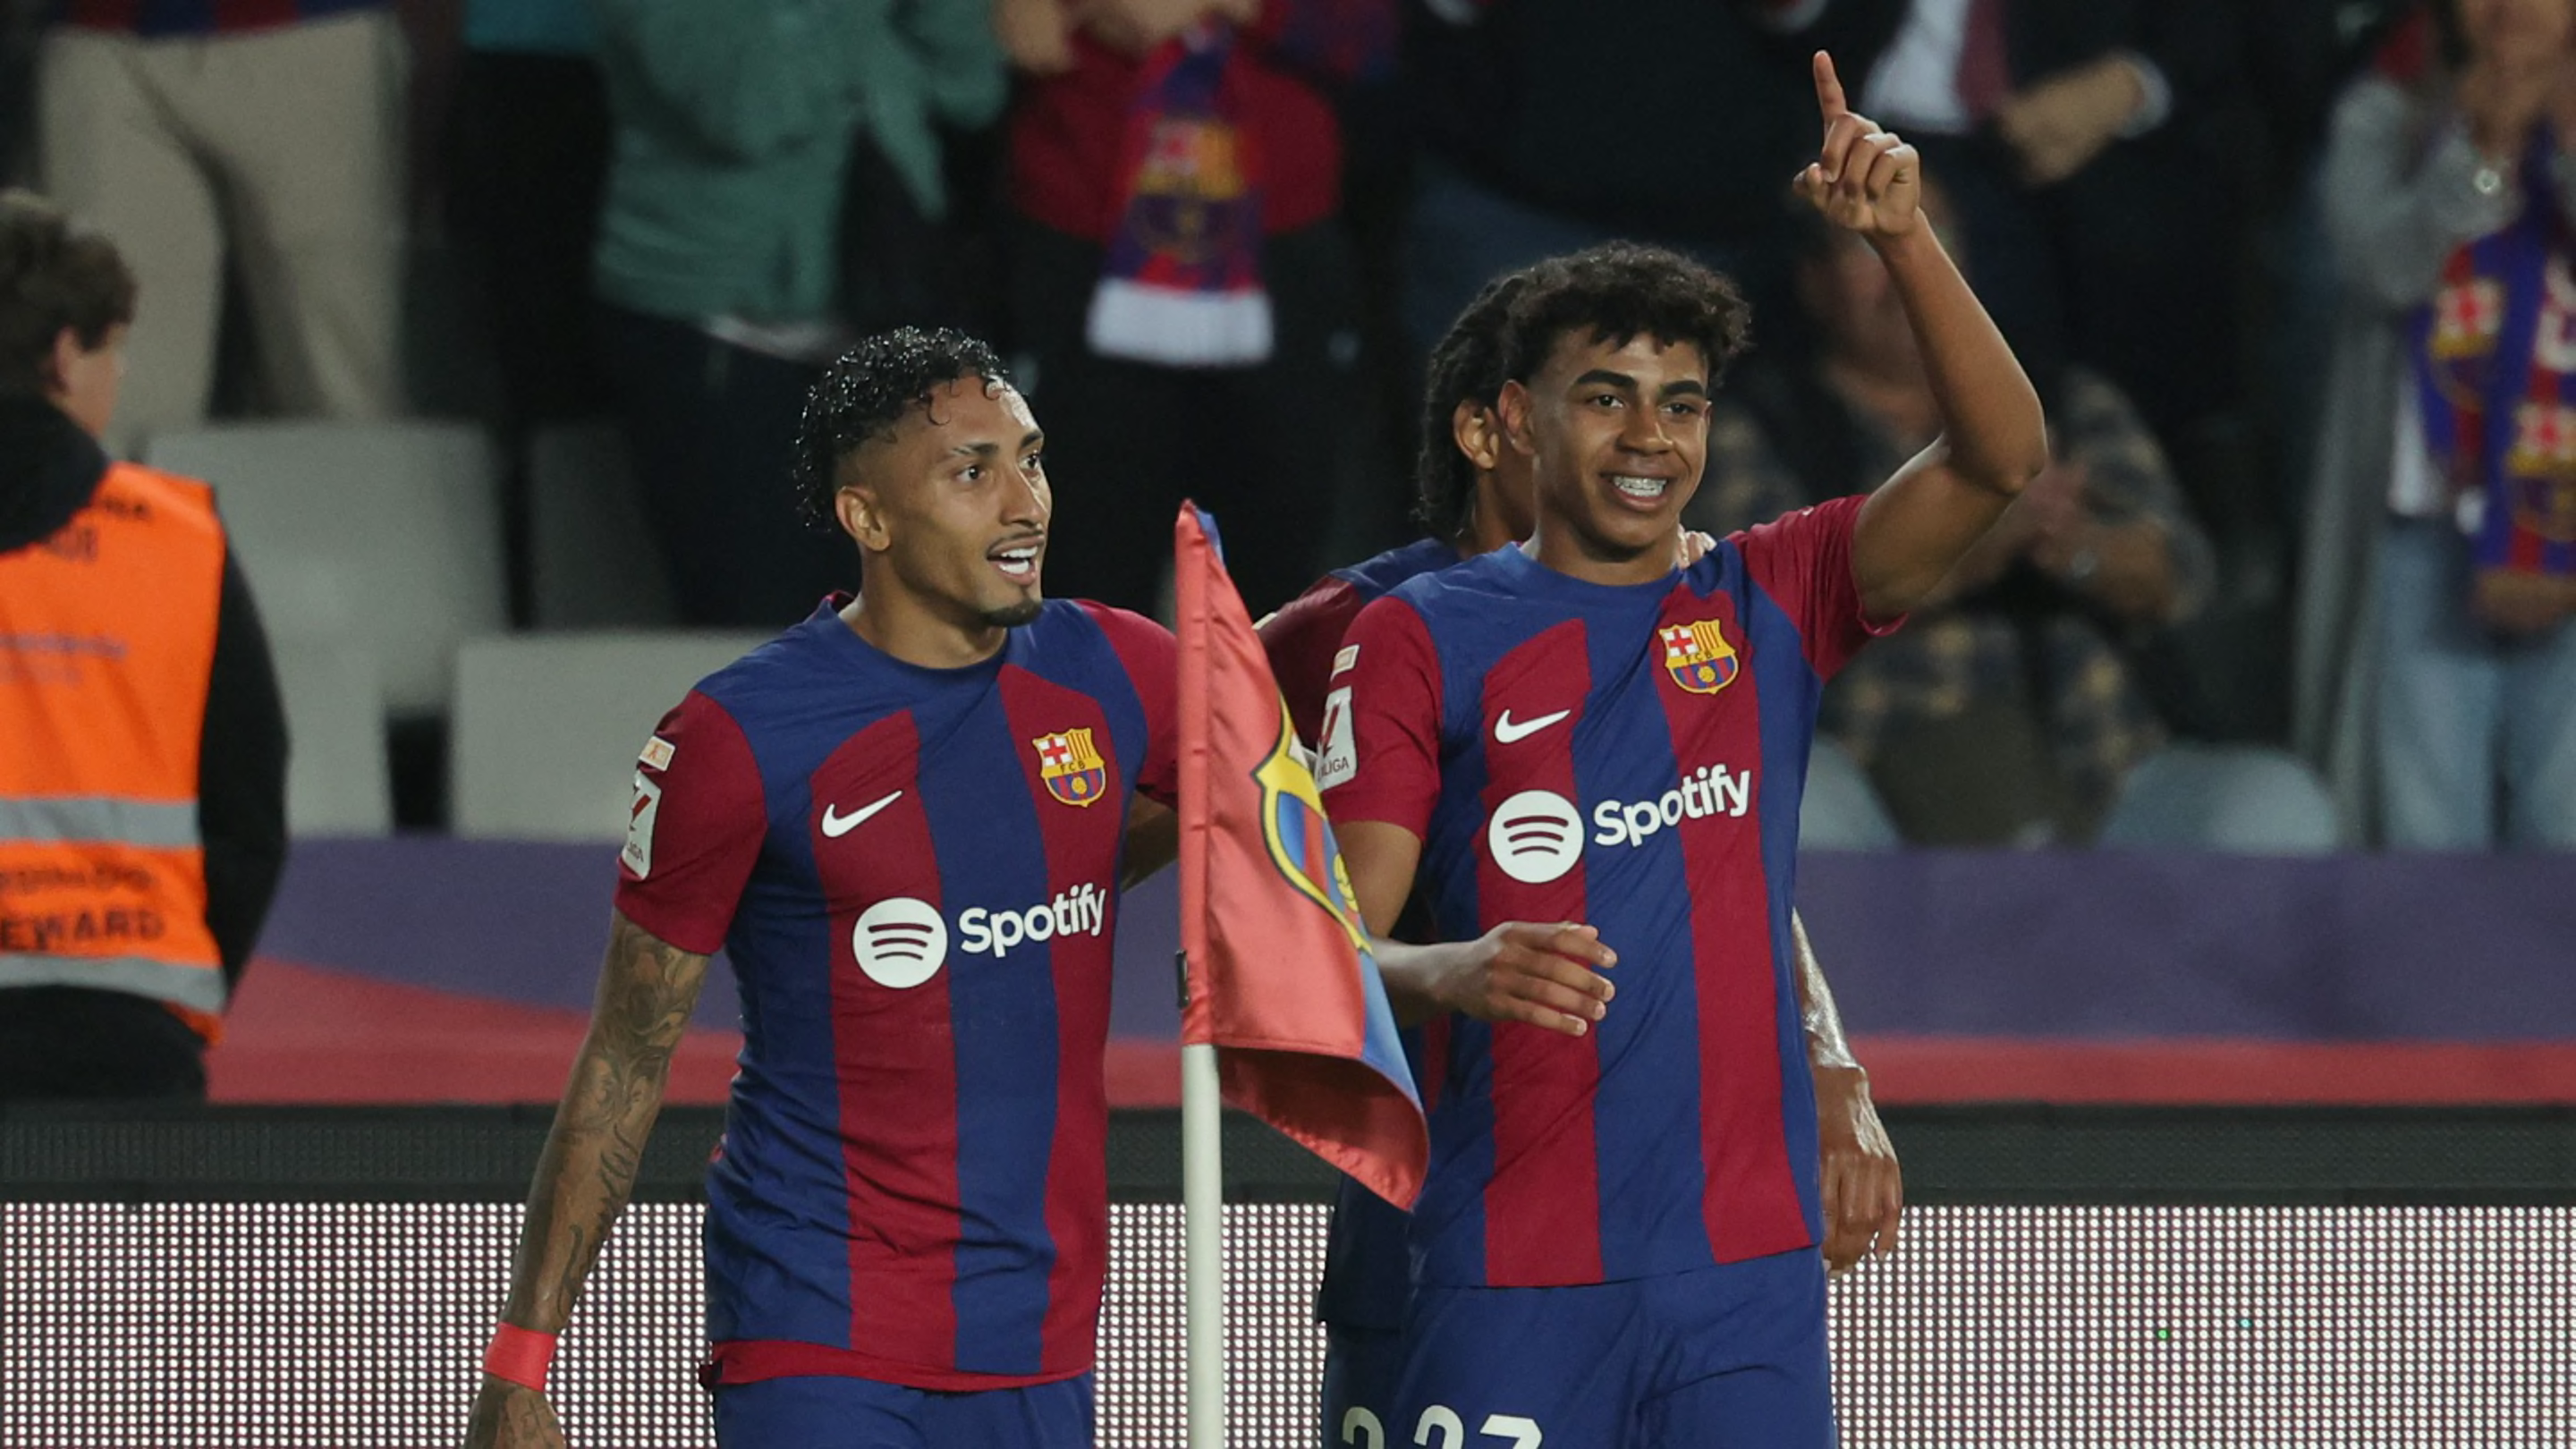 Barcelona 2-0 Real Sociedad: Player ratings as Barca jump into second place